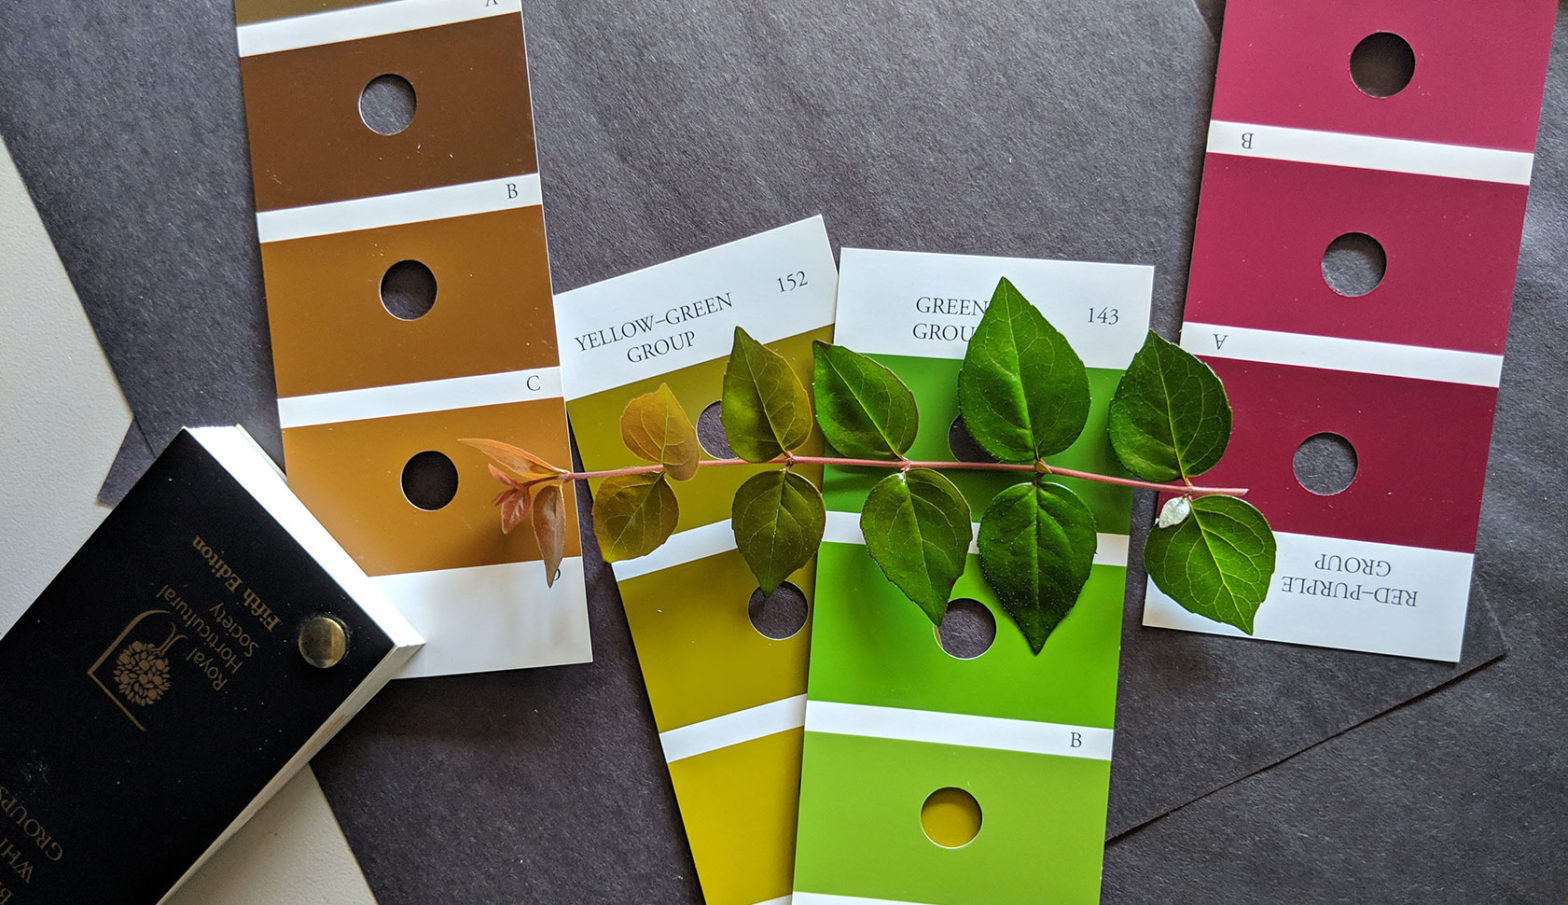 abelia leaf color compared to swatch book